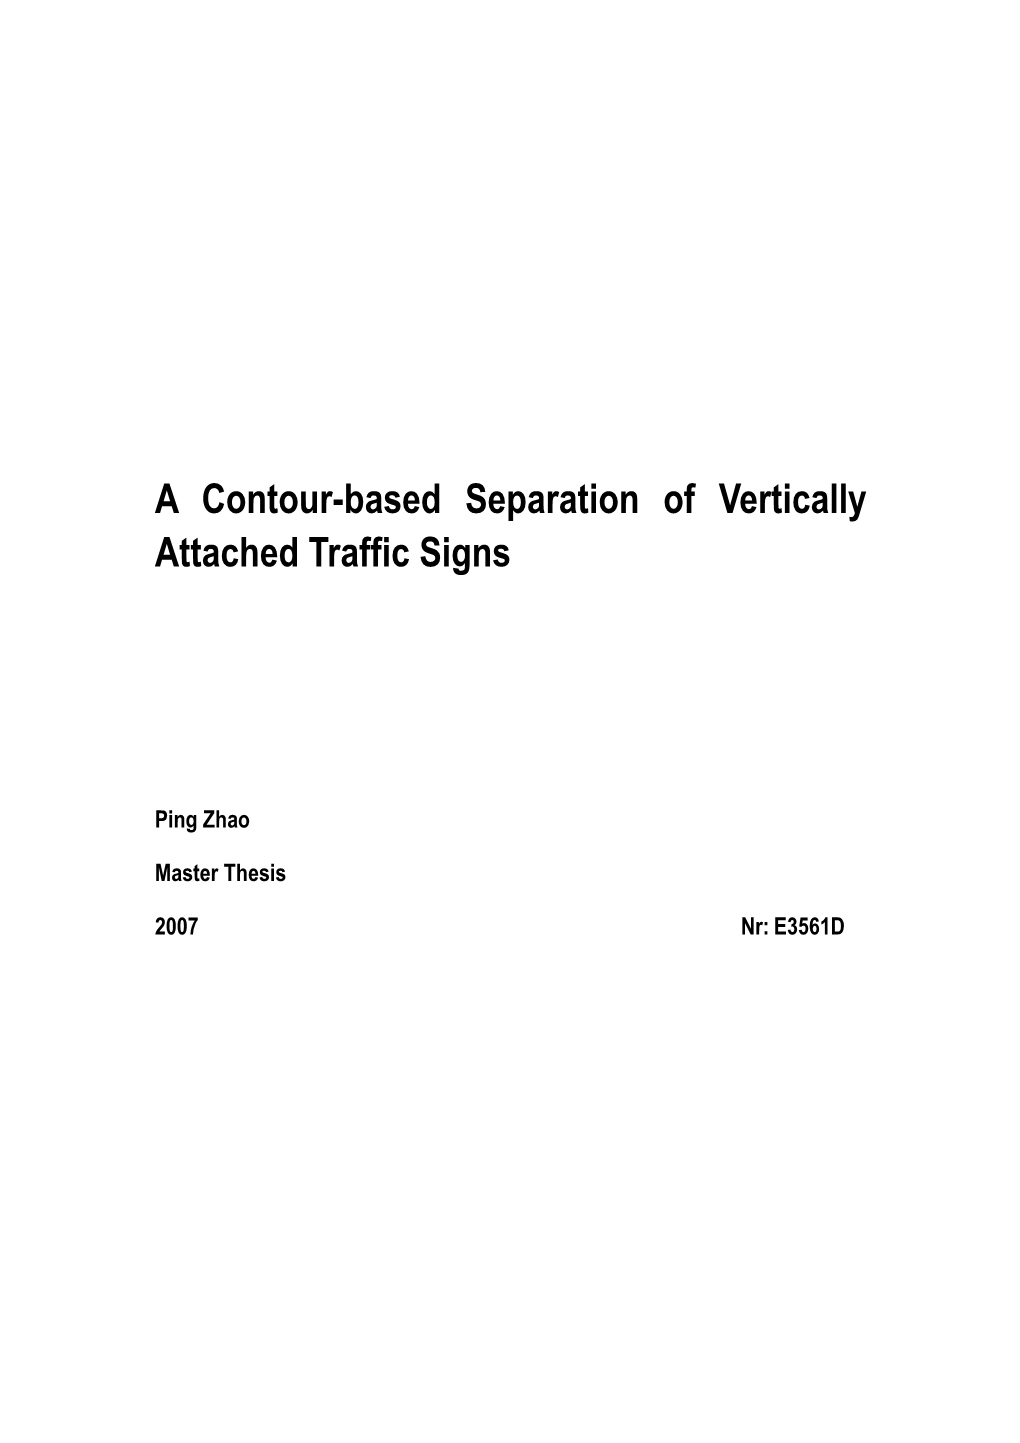 A Contour-Based Separation of Vertically Attached Traffic Signs